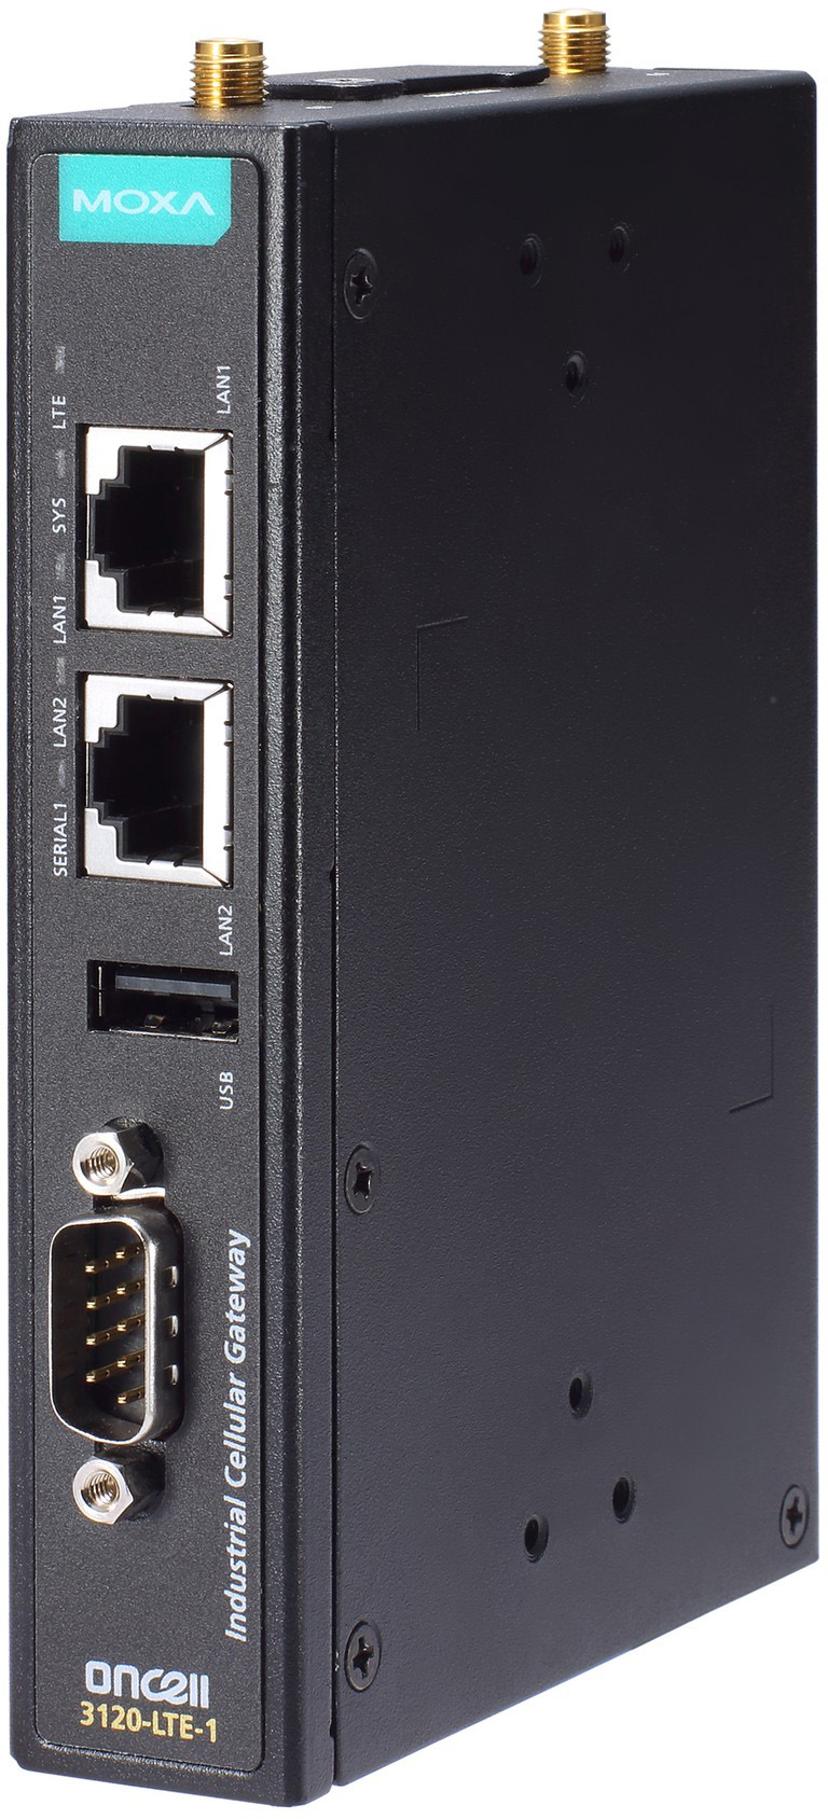 Moxa OnCell 3120-LTE-1 Industriell LTE Gateway